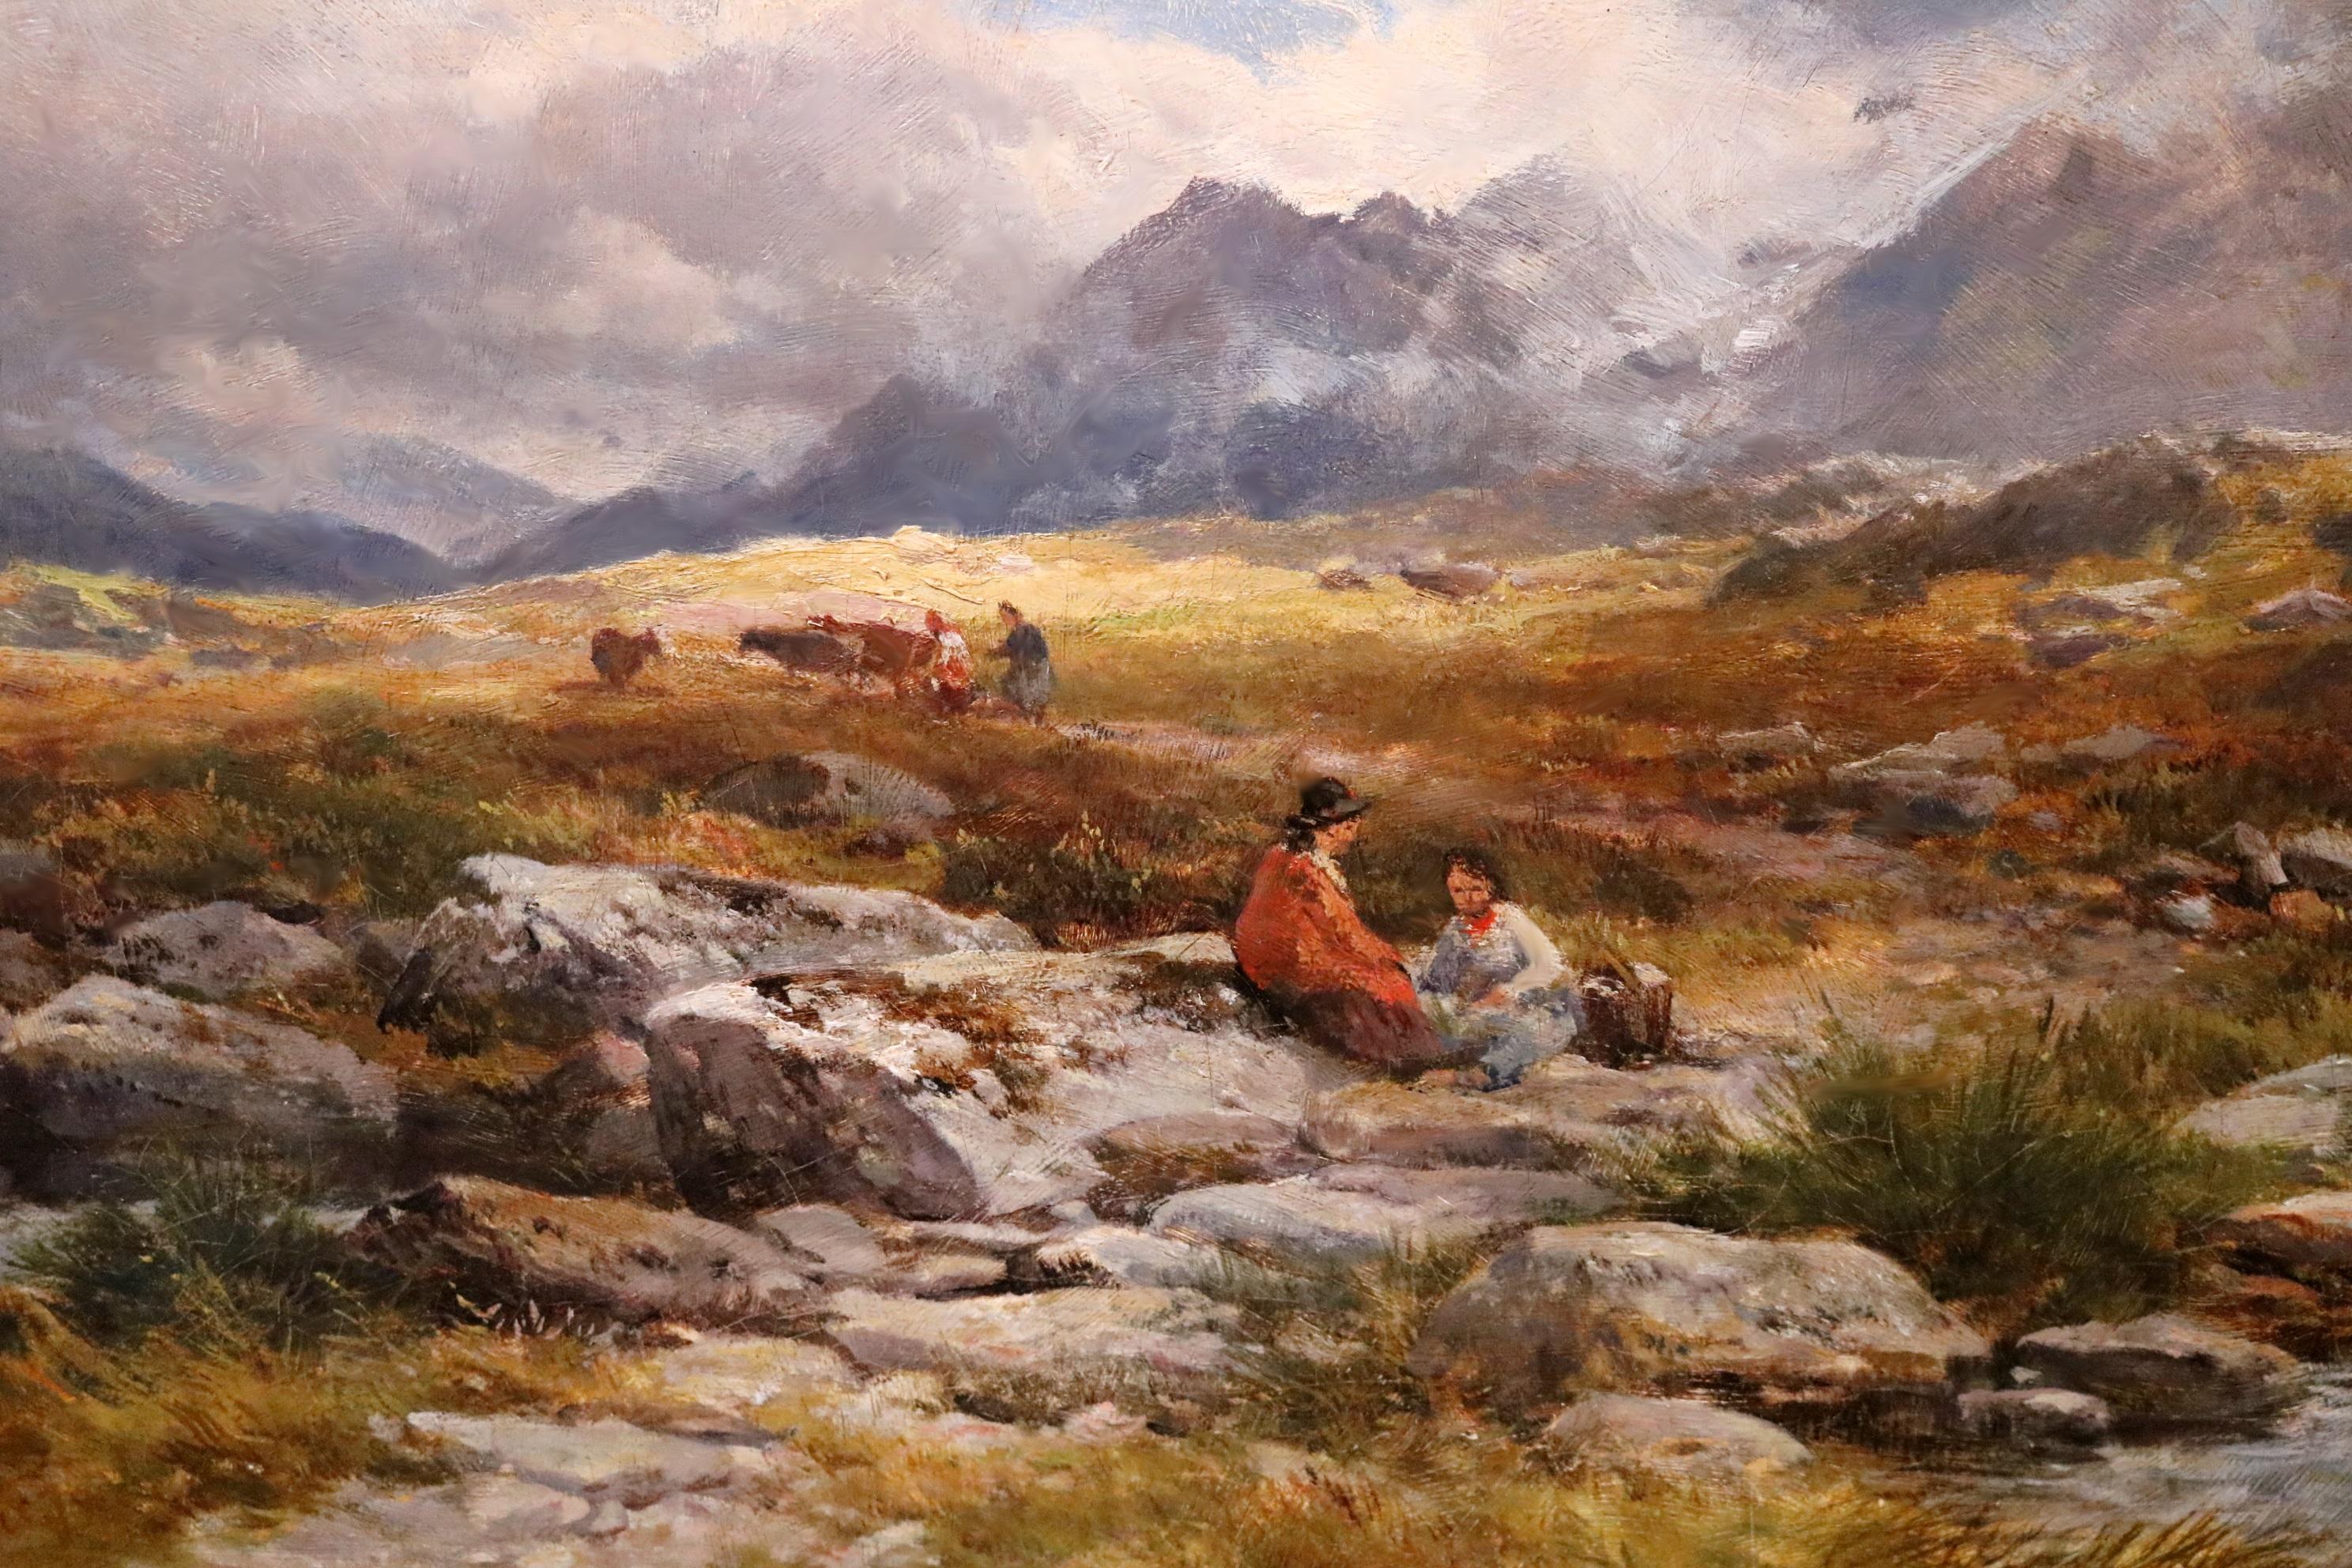 Before Glyder Fawr - Large 19th Century Oil Painting Welsh Mountain Landscape  1